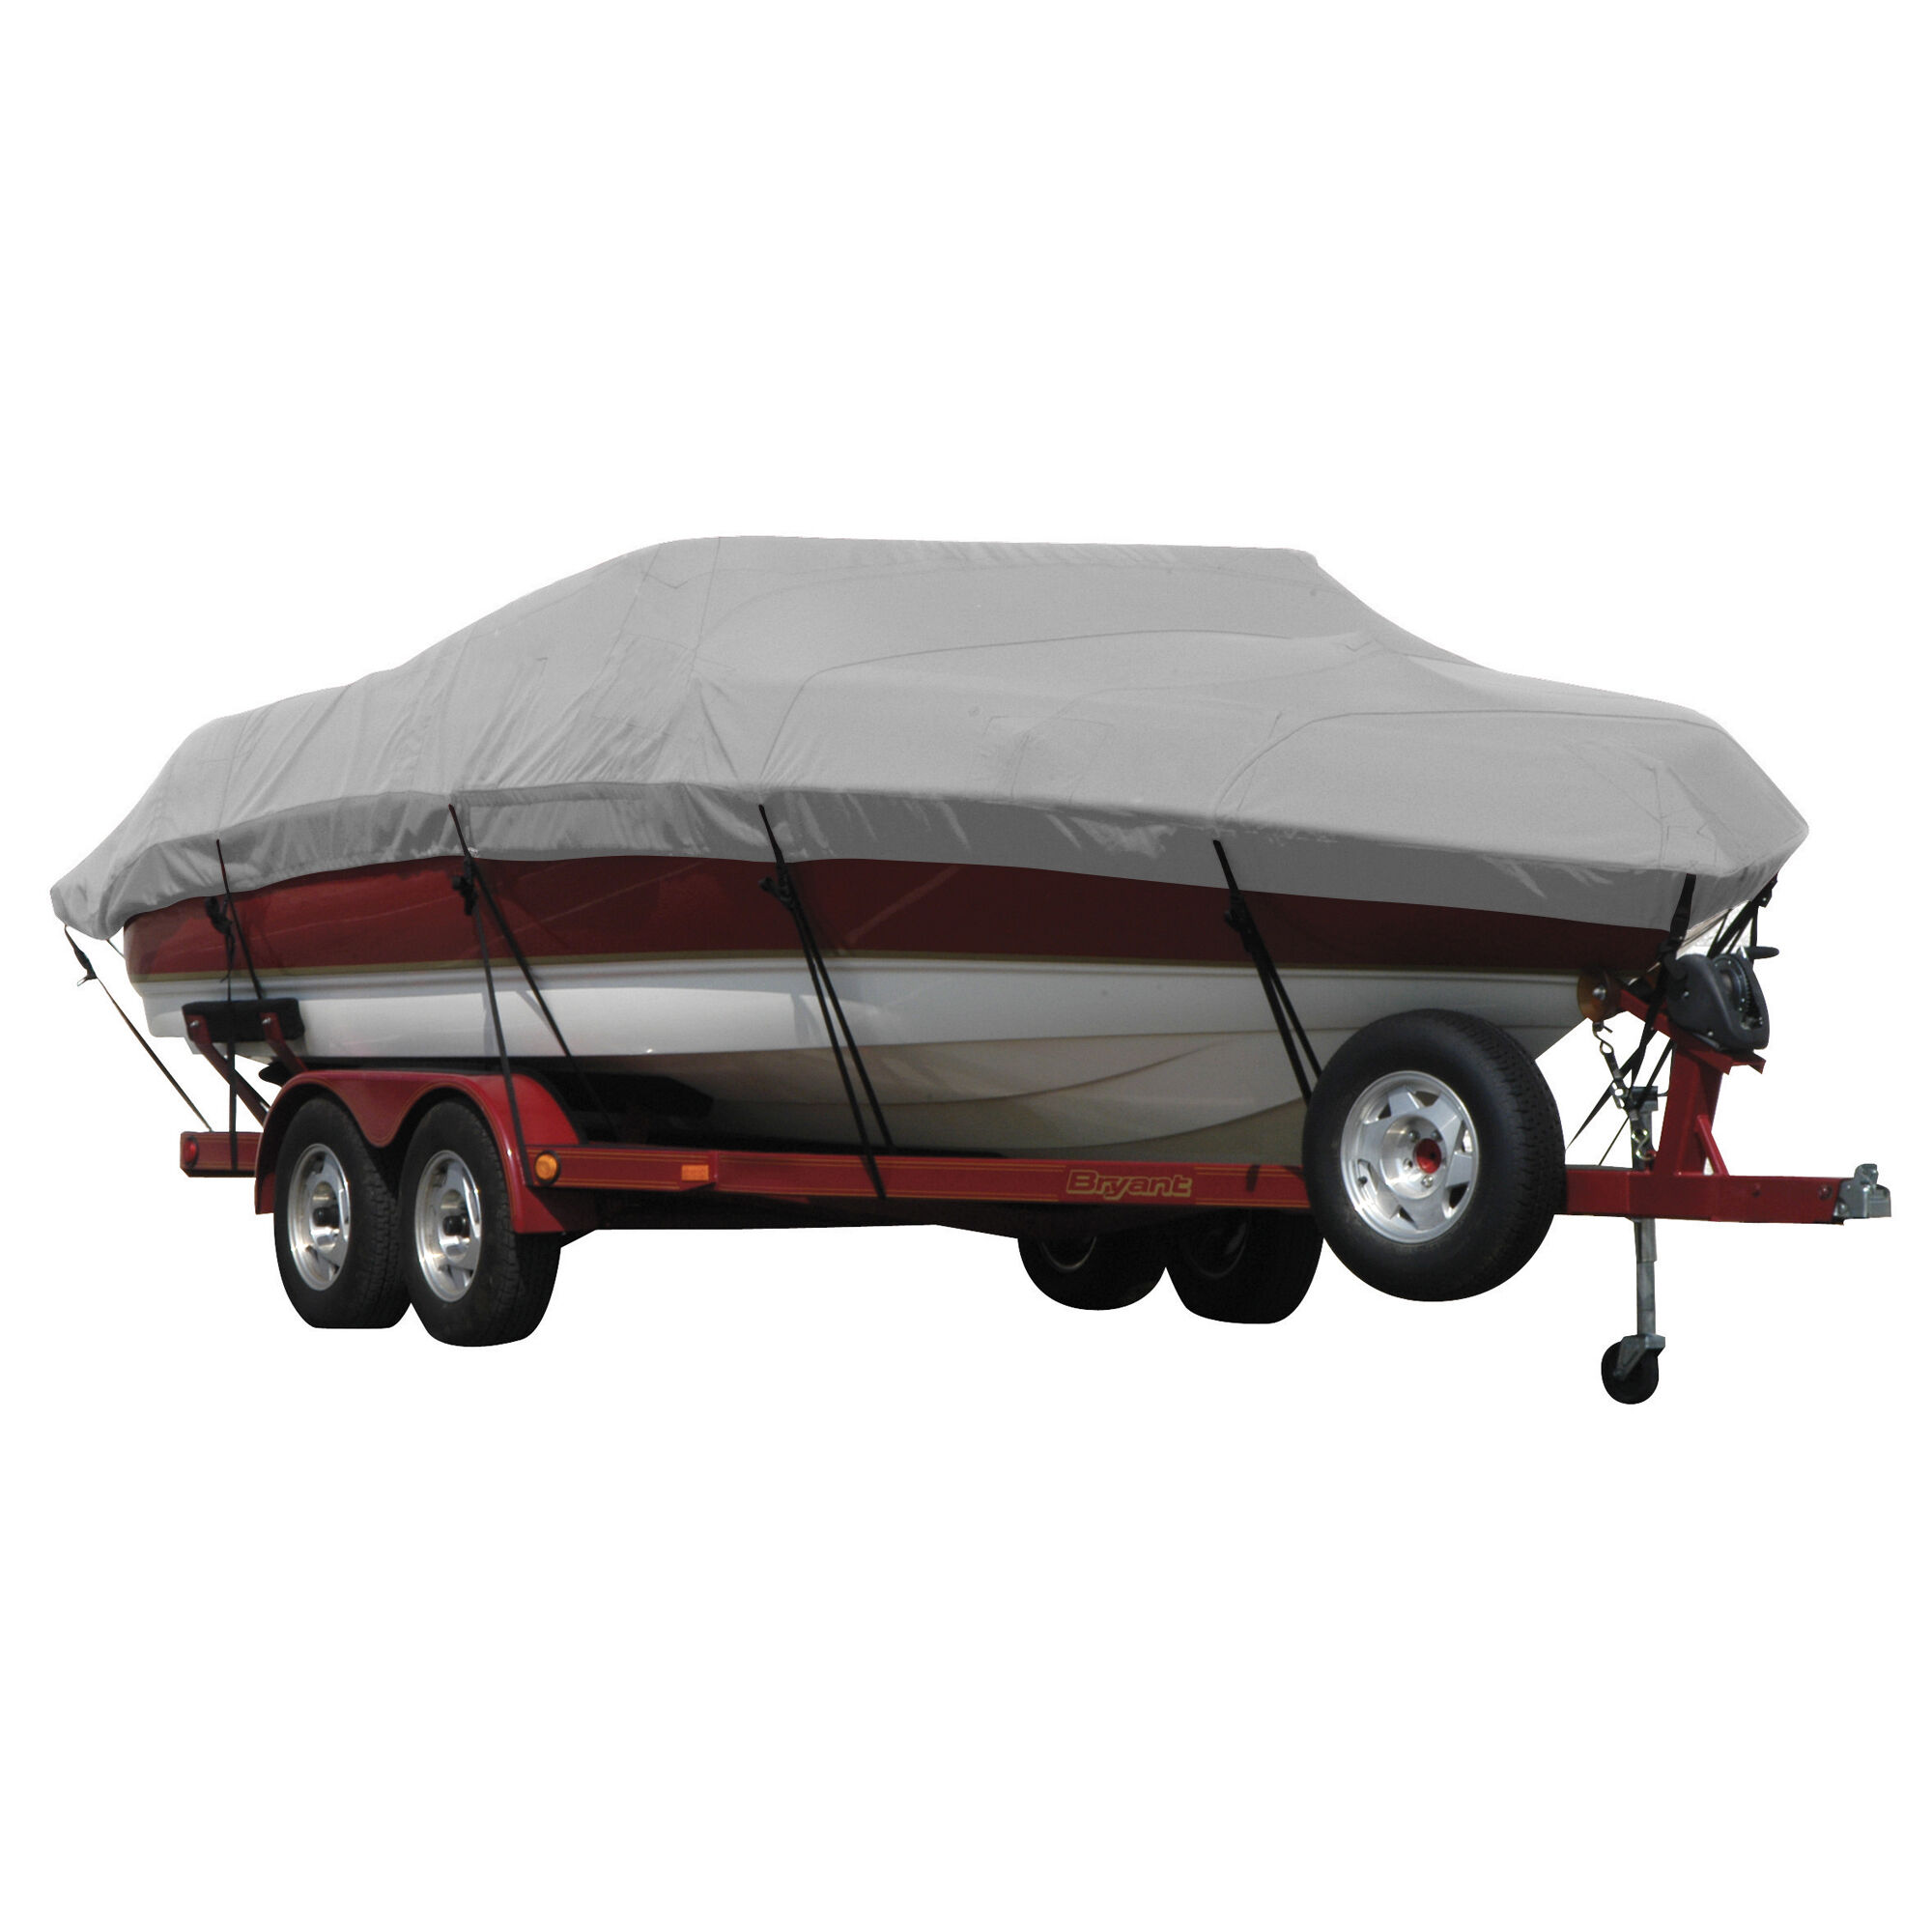 Covermate Exact Fit Sunbrella Boat Cover for Lund 1700 Pro Angler Dlx 1700 Pro Angler Dlx w/ Starboard Trolling Motor O/B. Grey